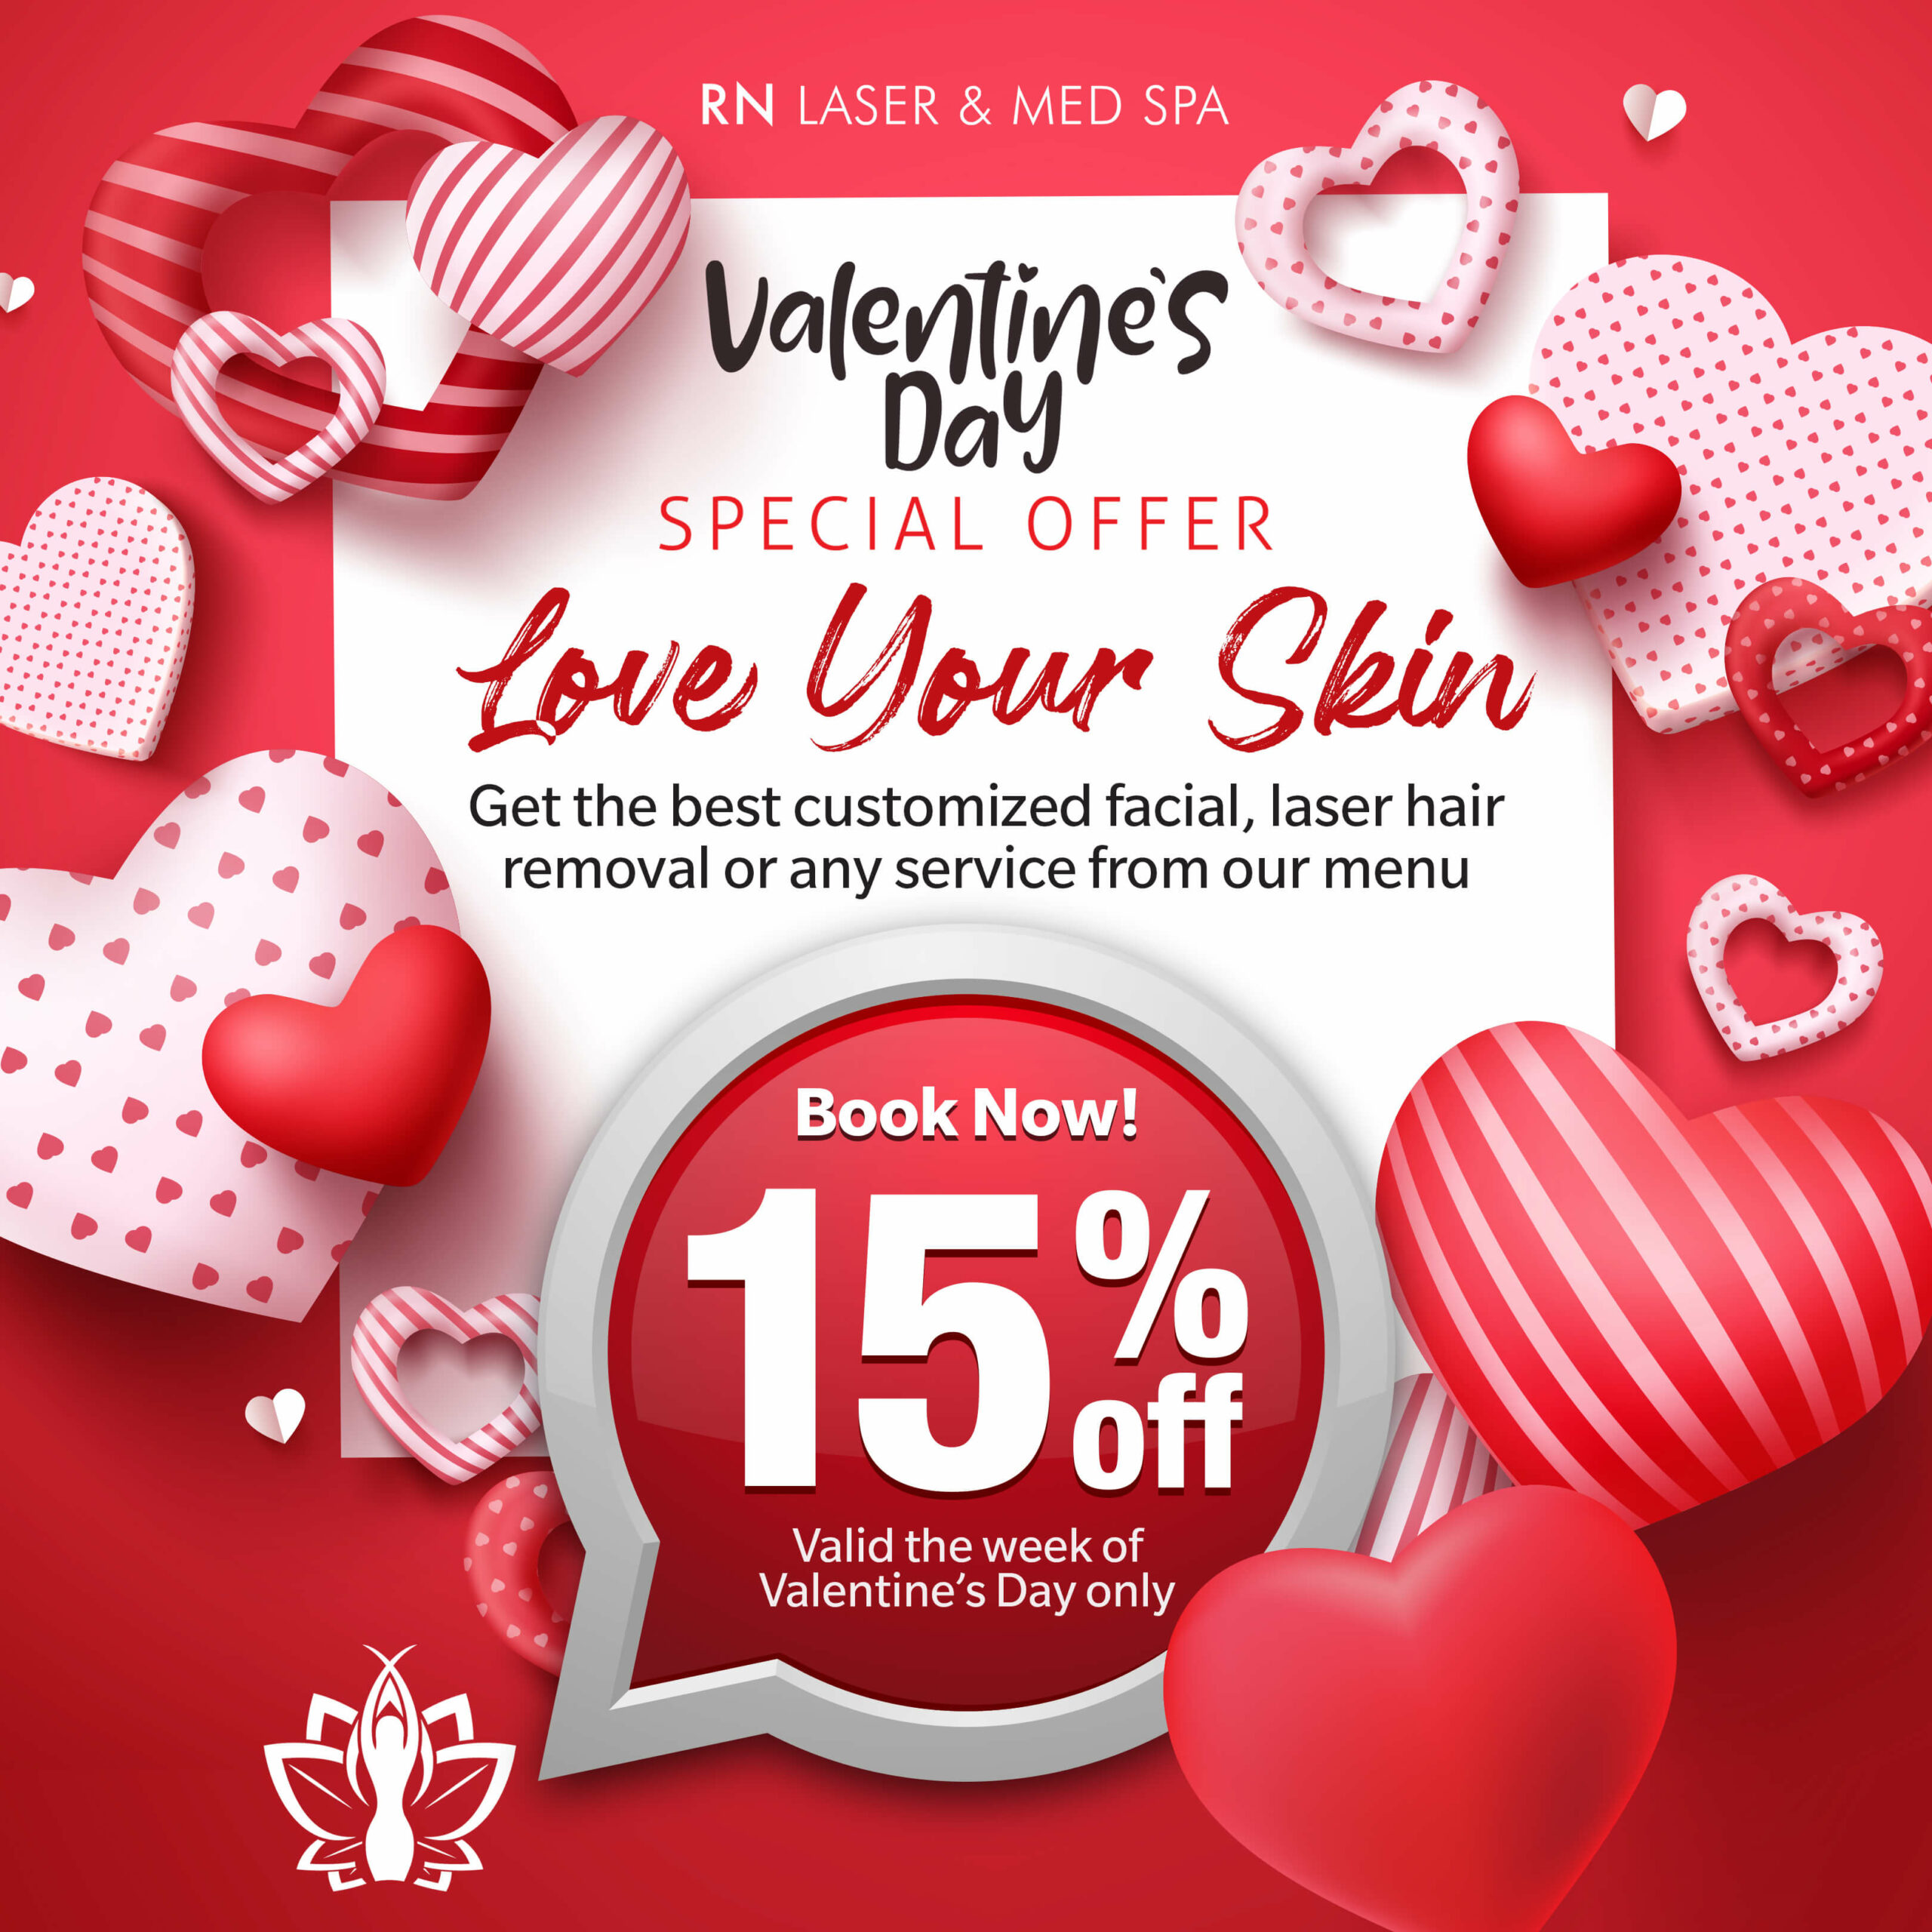 Love your skin valentines day special